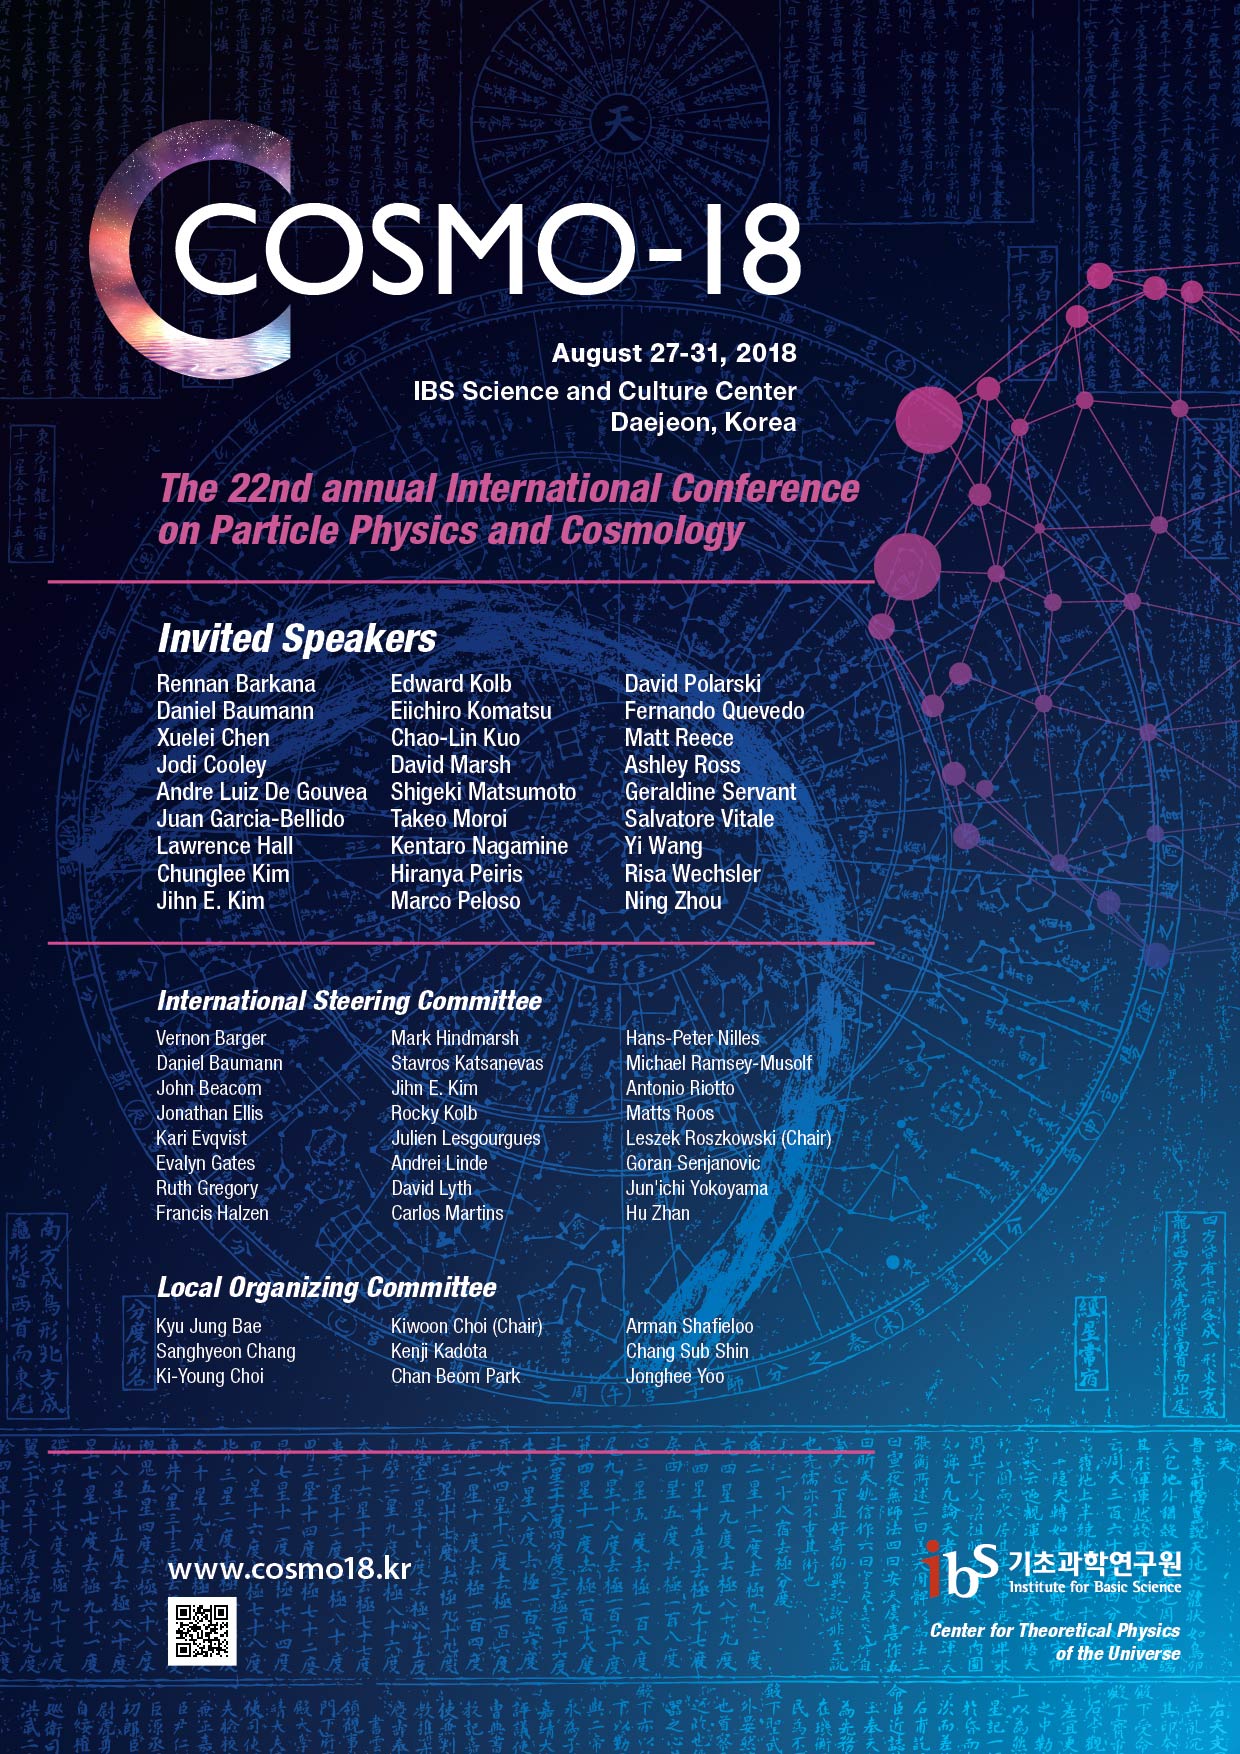 The 22nd annual International Conference on Particle Physics and Cosmology (COSMO-18) 사진